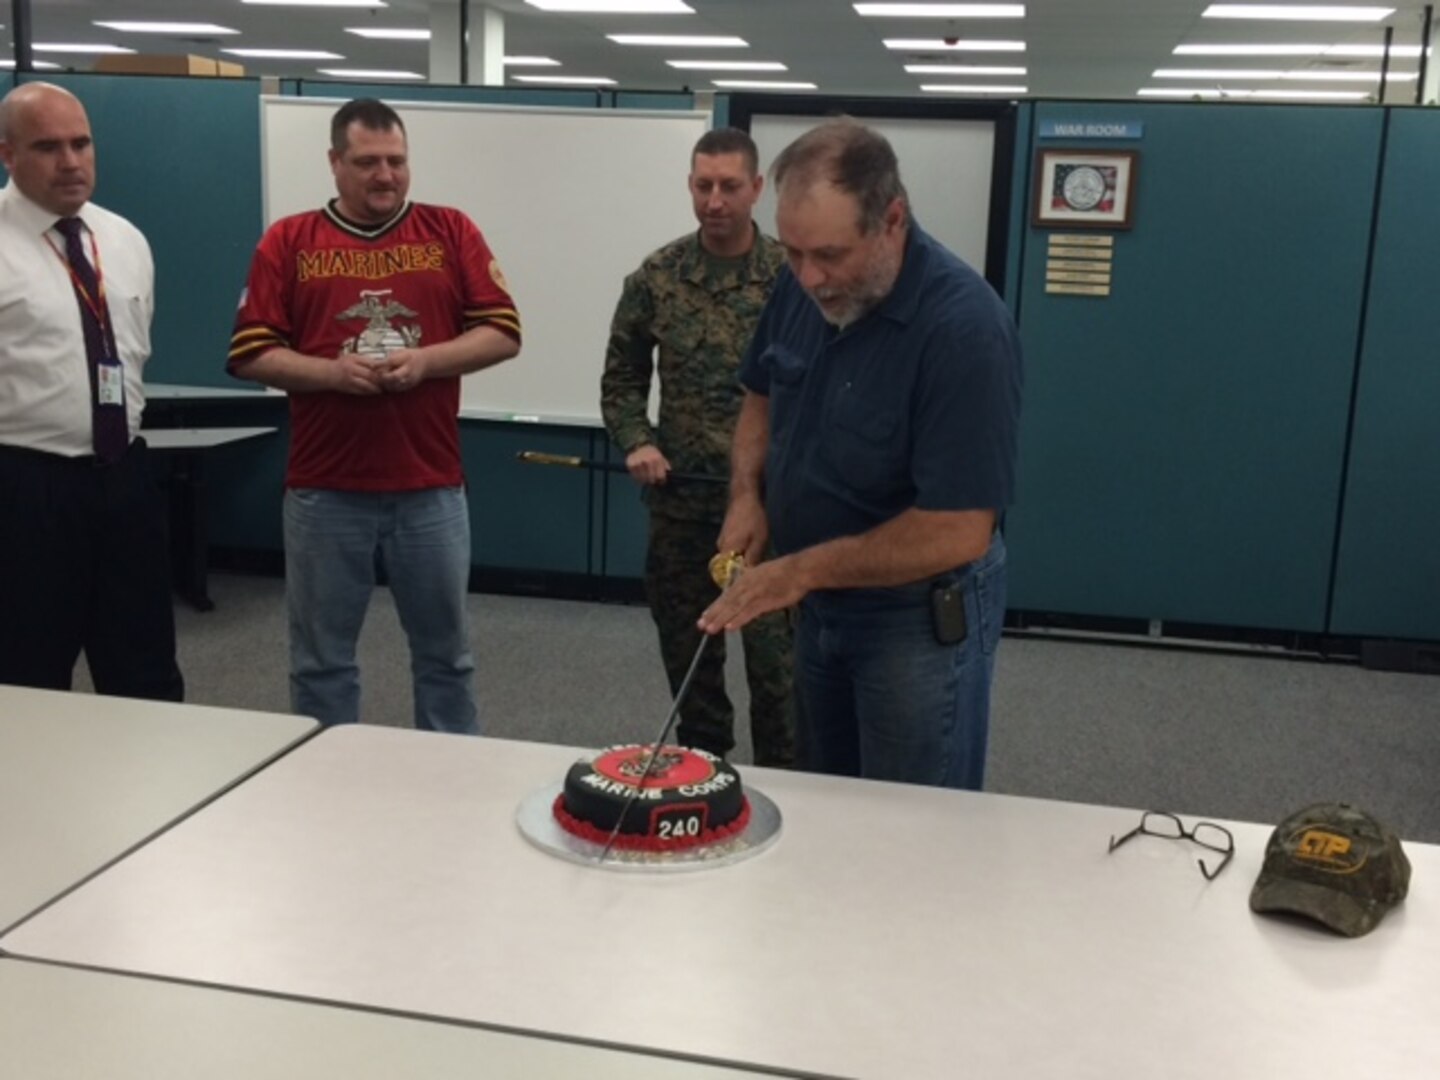 Shawn Searer, DLA Distribution Susquehanna, Pa., maintenance supervisor, carries on Marine Corps tradition by cutting the cake as the most senior Marine at the organization.